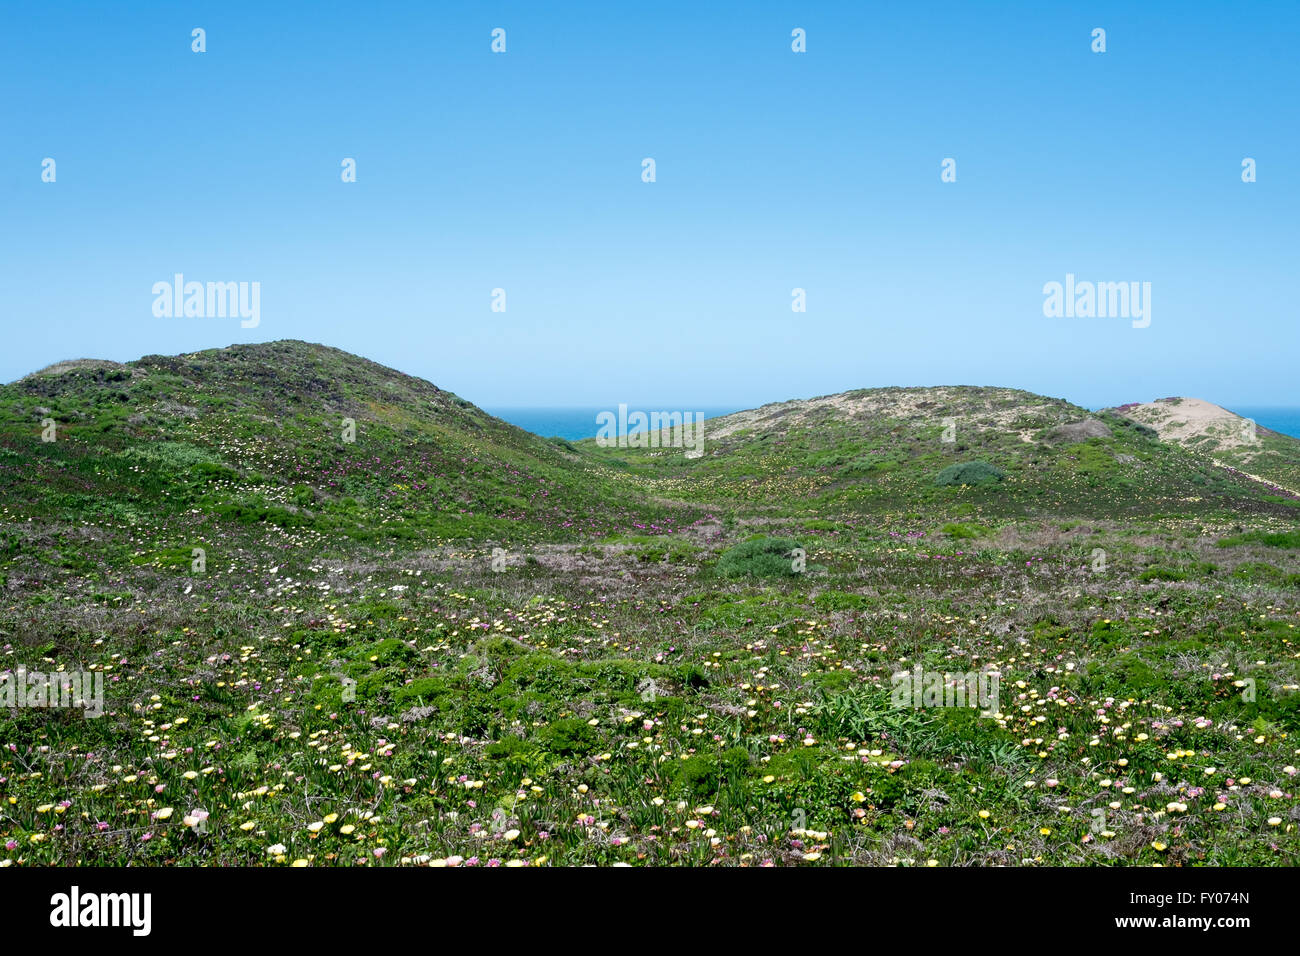 California seaside dunes covered with pink, yellow and white ice plant (figwort) Stock Photo